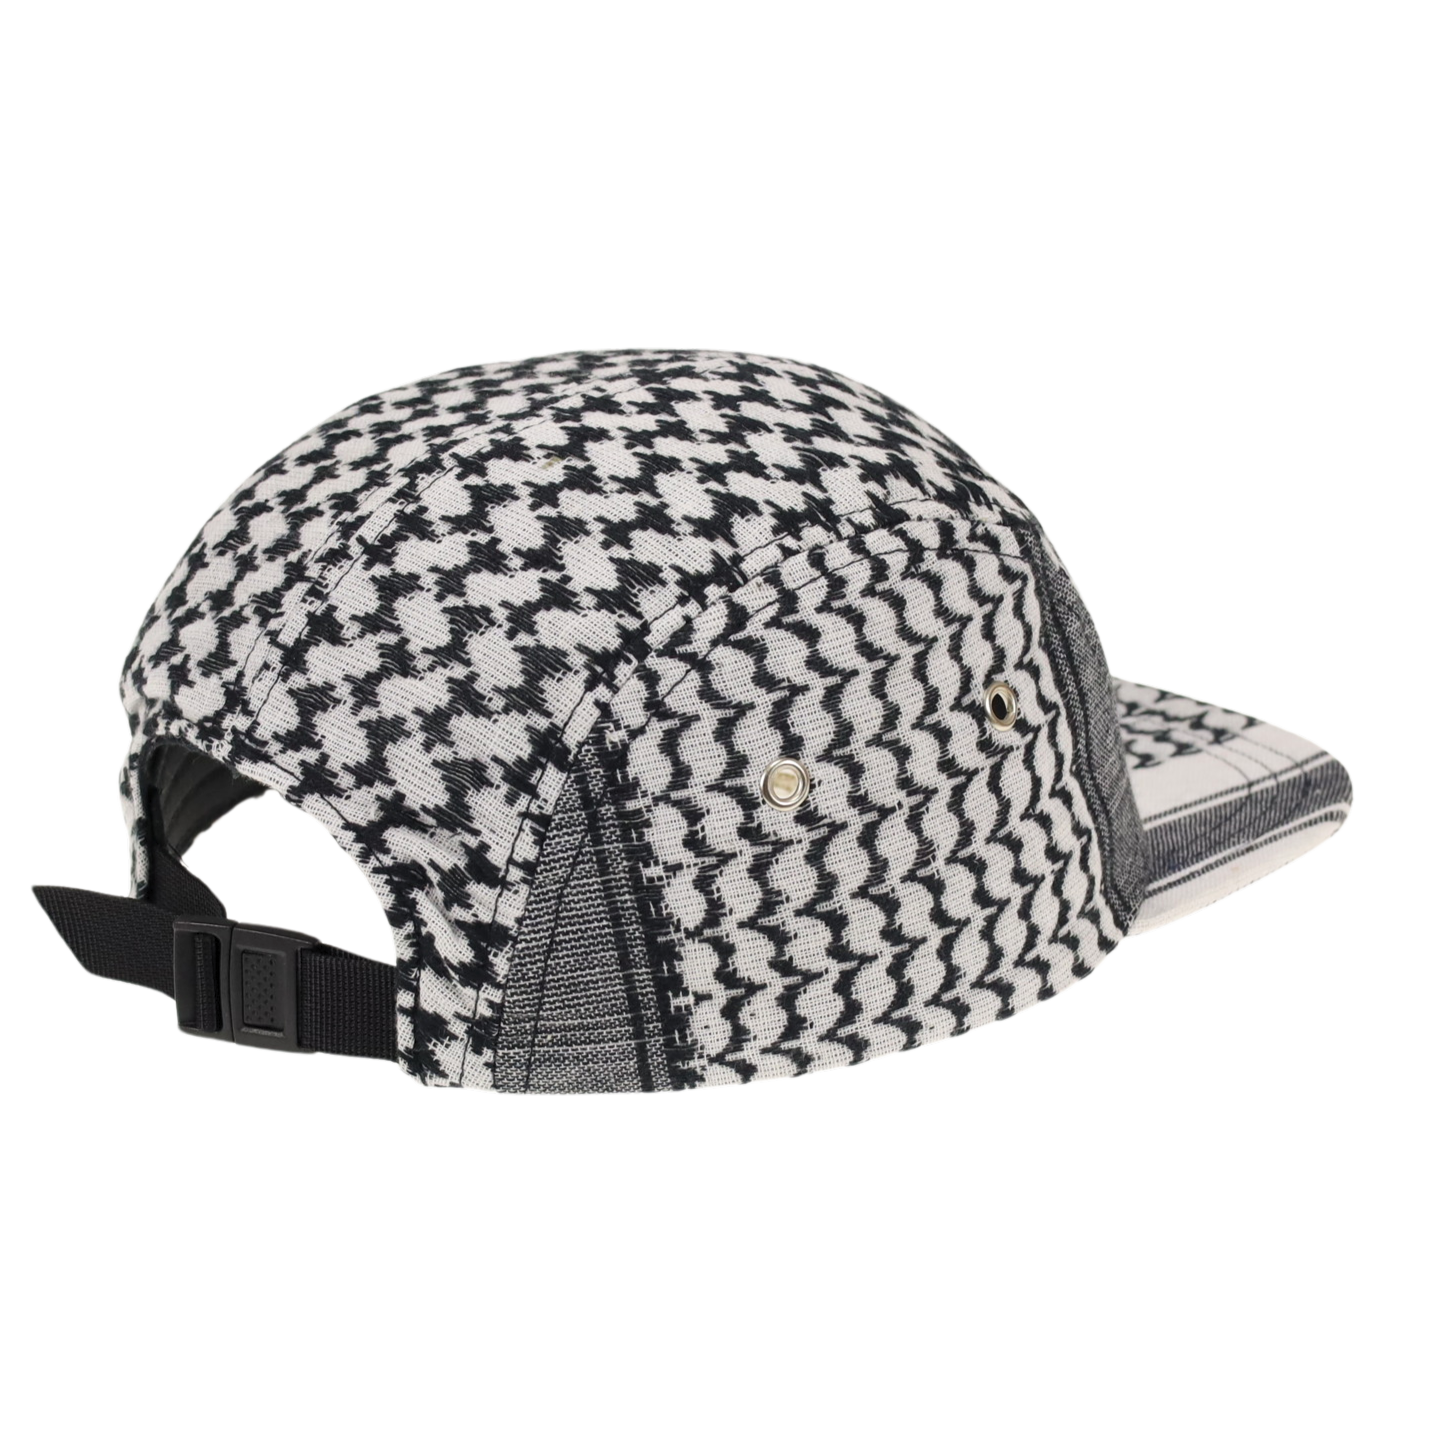 5-PANEL CAP | Kufiya - Peace in the middle East